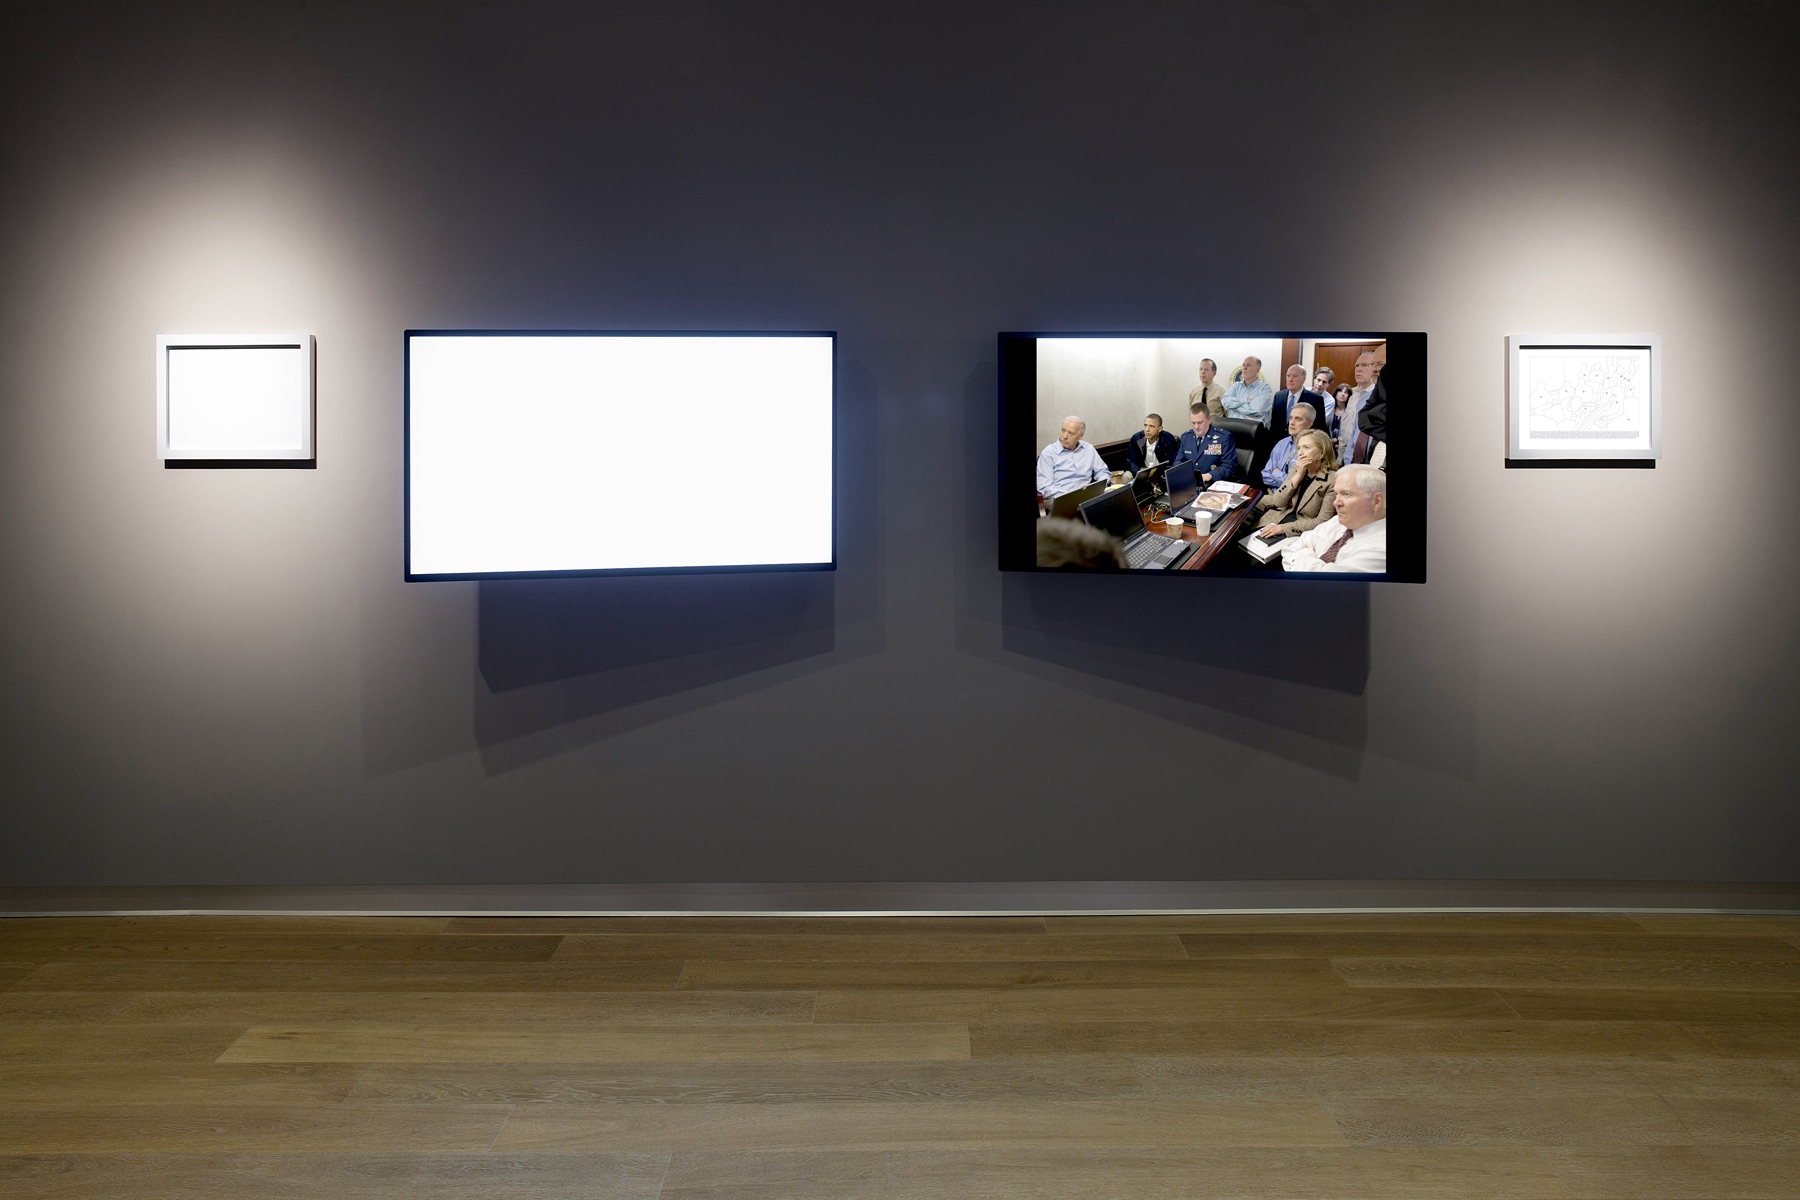 Alfredo Jaar. May 1, 2011, 2011. Two LCD monitors and two framed prints. Original White House photograph by Pete Souza. Photo by Frazer Spowart. Courtesy of the artist and Galerie Lelong, kamel mennour, Galerie Thomas Schulte.